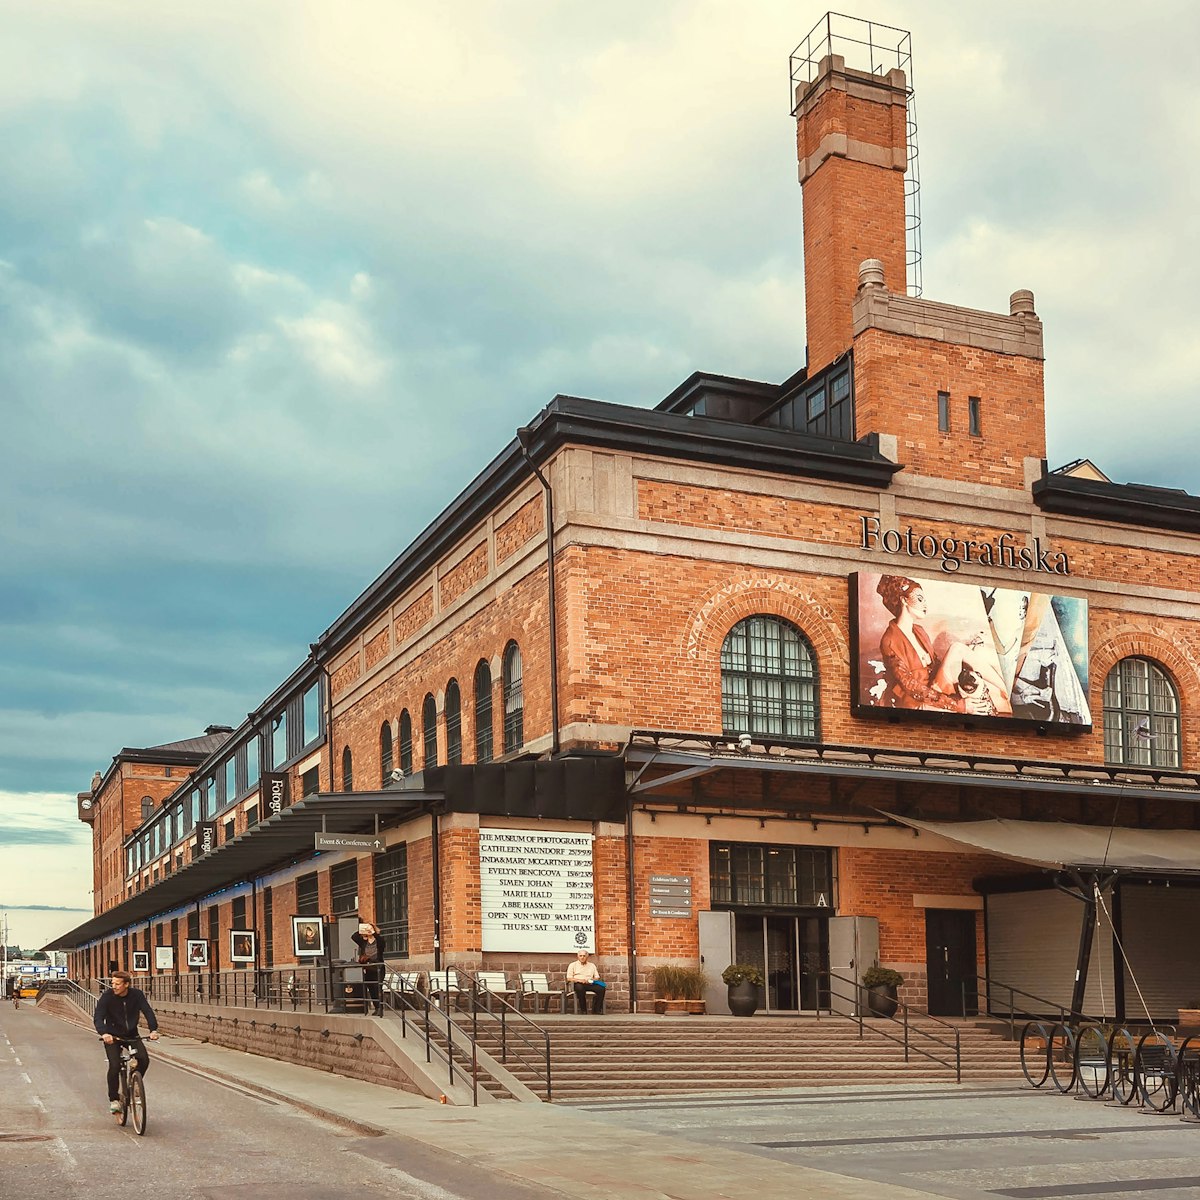 A local cycles past the exposed brick building housing the Fotografiska in Stockholm